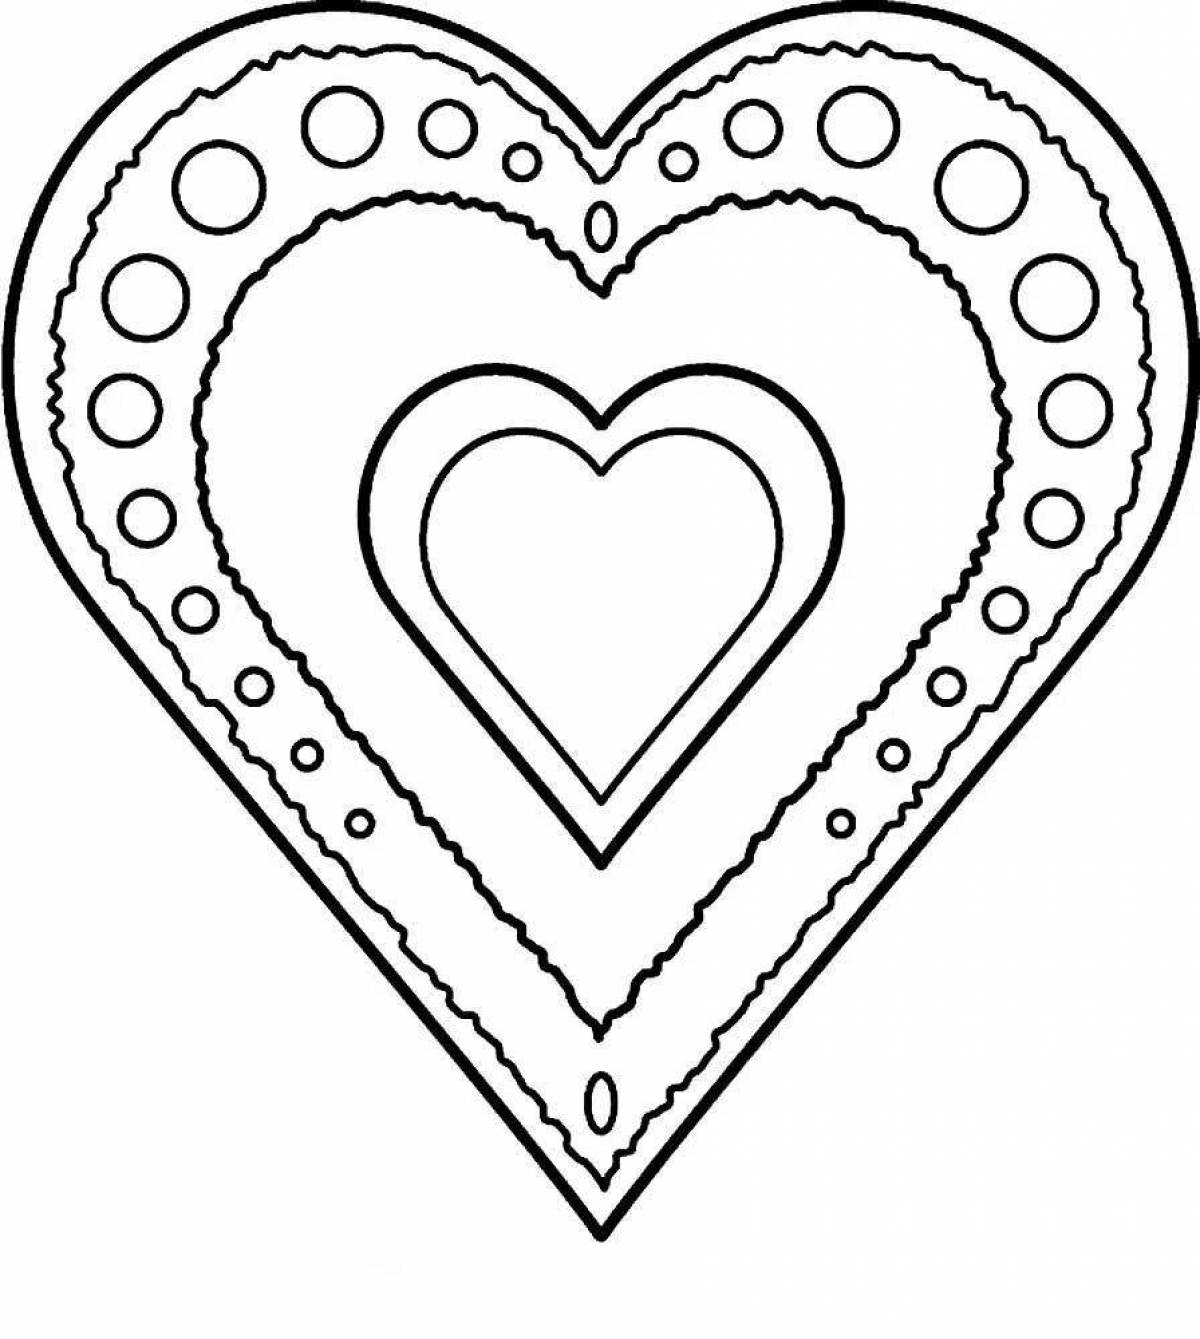 Colorful heart coloring book for 5-6 year olds